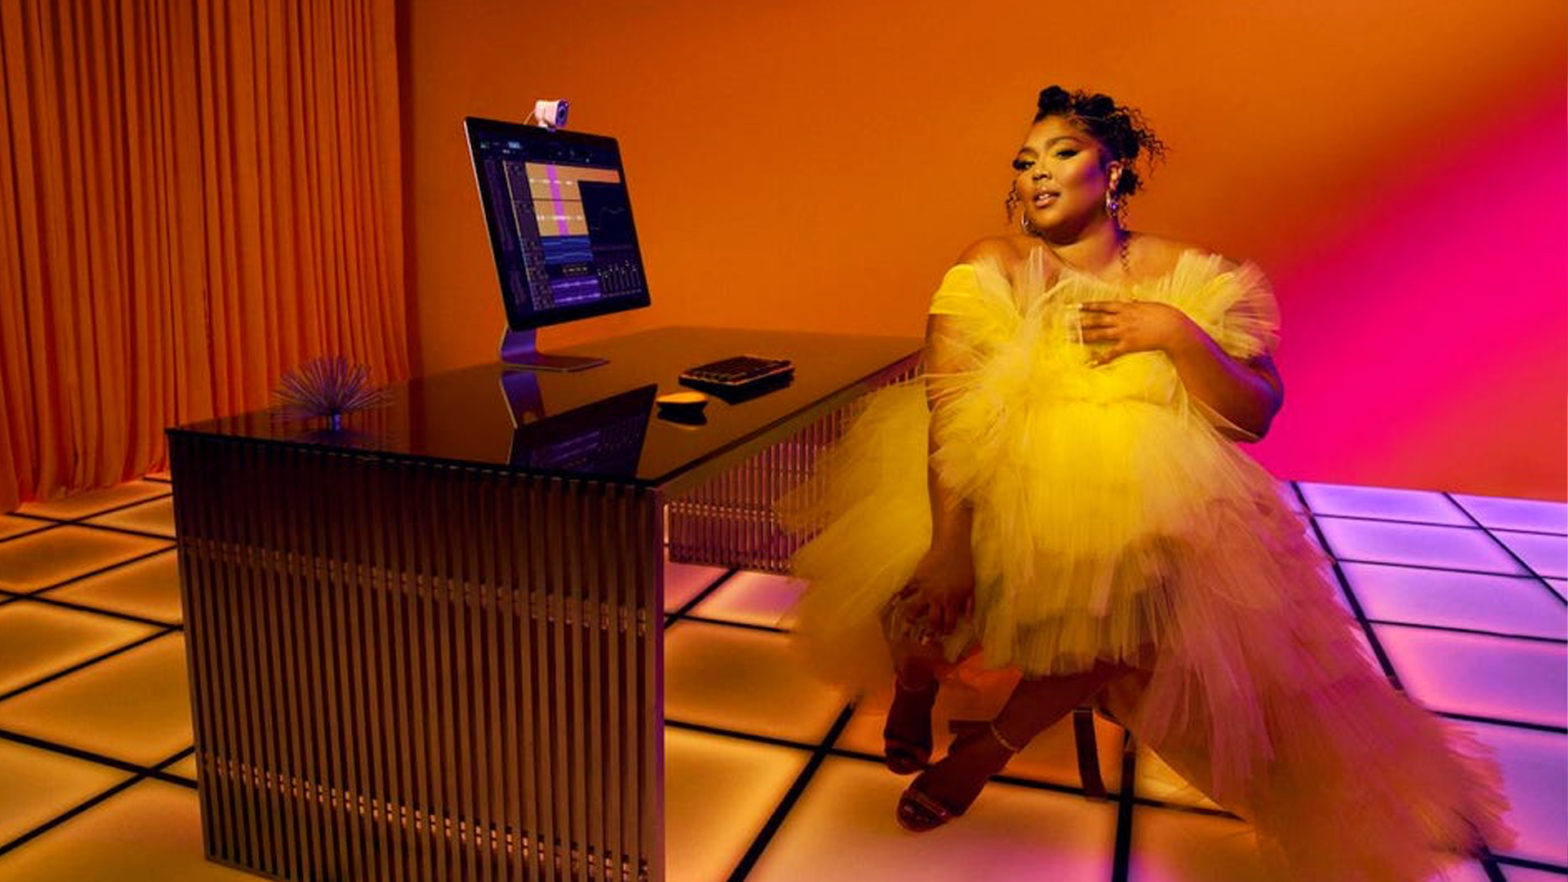 Lizzo Partners With Tech Accessories Brand Logitech To Release Her New Single